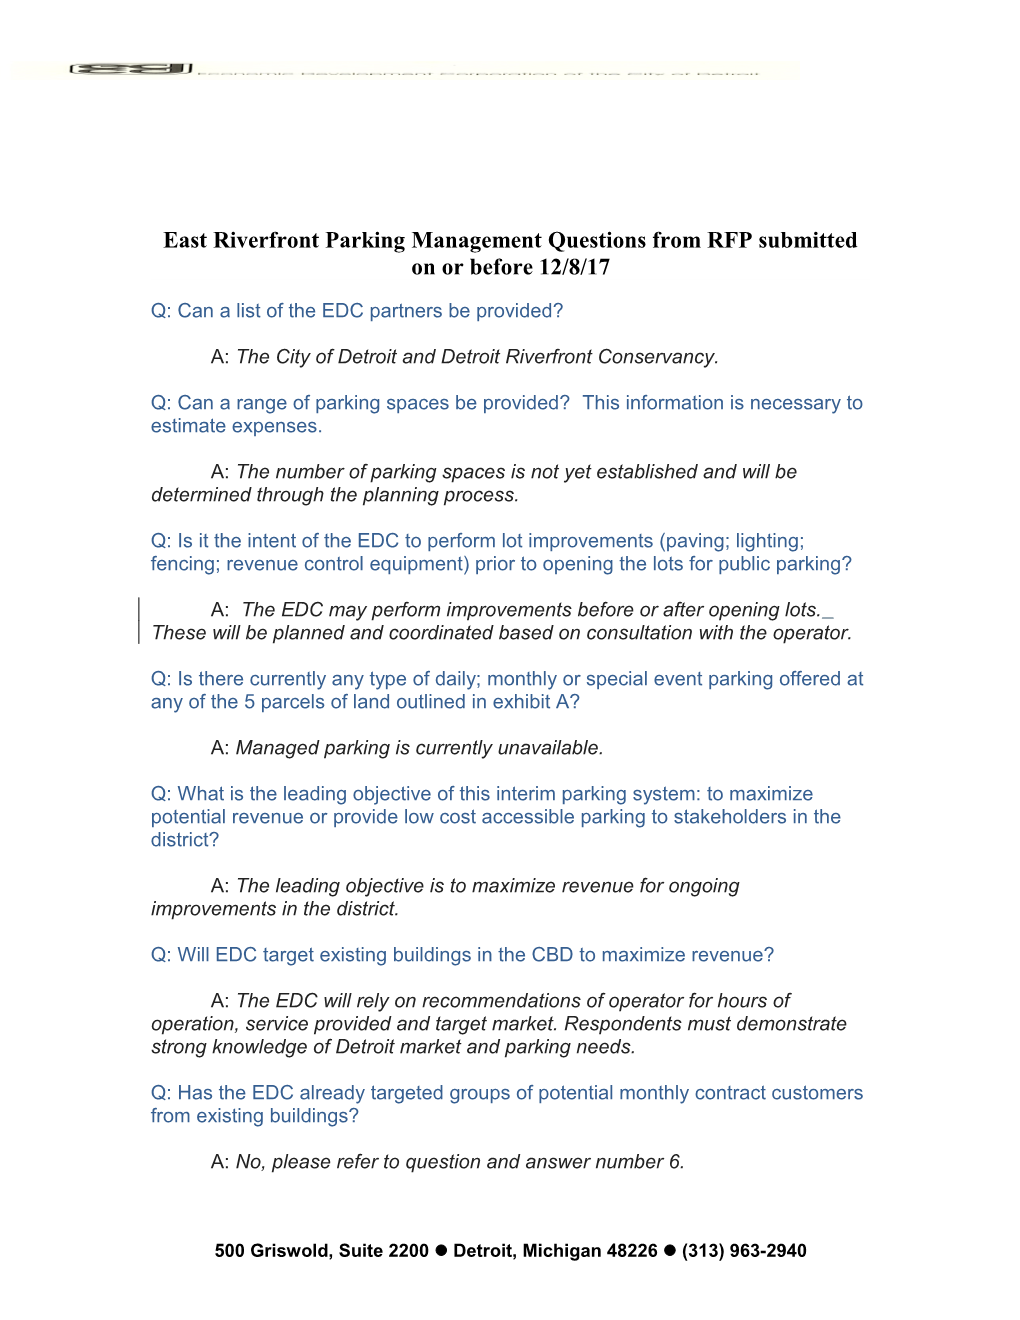 East Riverfront Parking Management Questions from RFP Submitted on Or Before 12/8/17